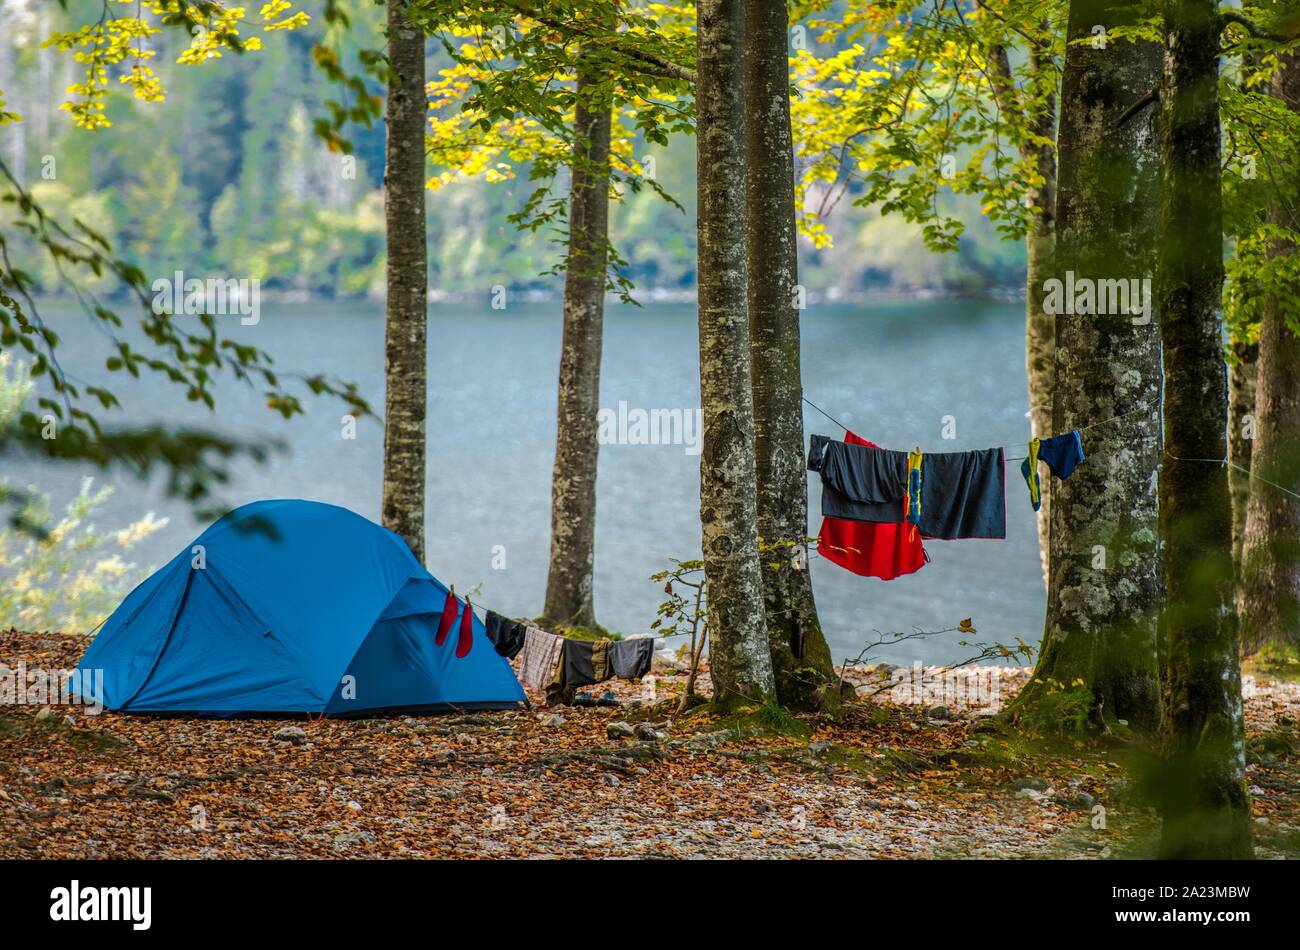 Wilderness Tent Camping. Blue Modern Tent and Drying Clothes on a Rope Between Forest Trees. Outdoor Campsite at the Lake. Stock Photo